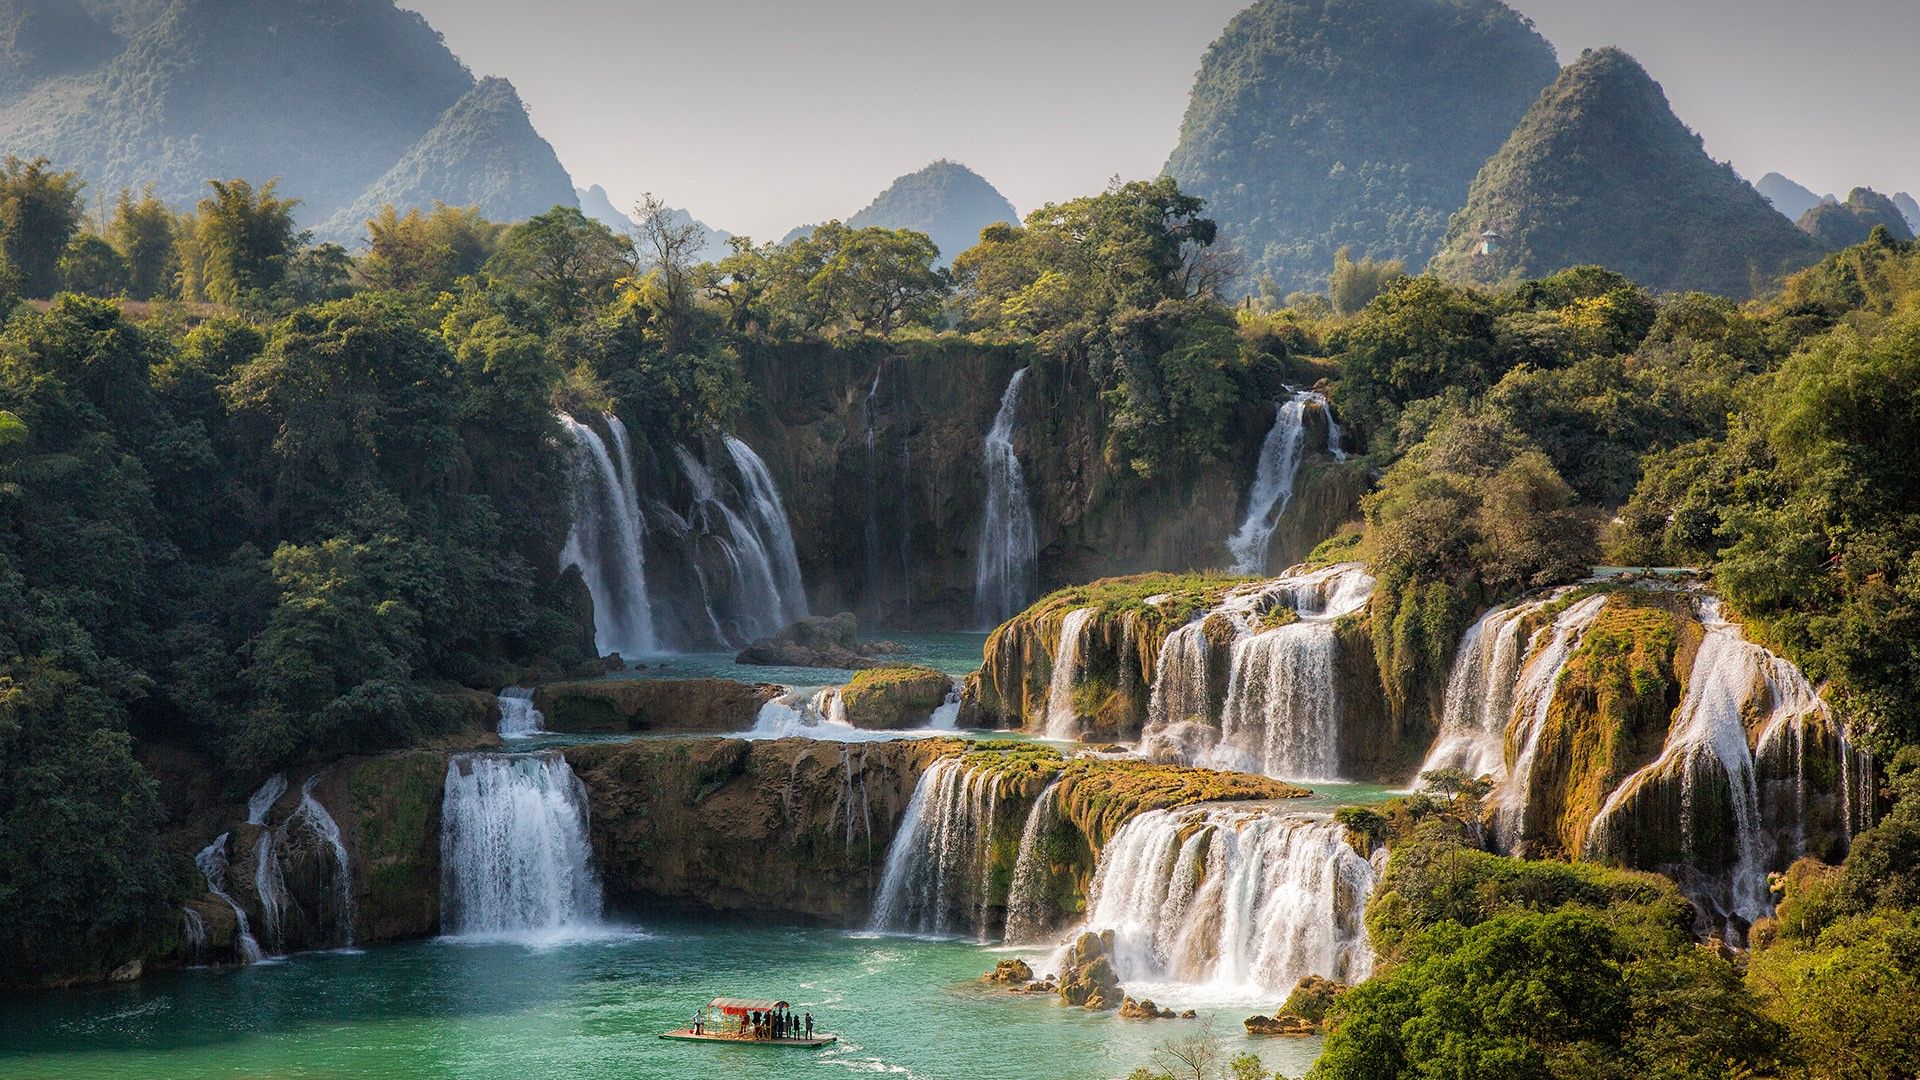 A Guide To Ban Gioc Detian Falls: All You Need To Know